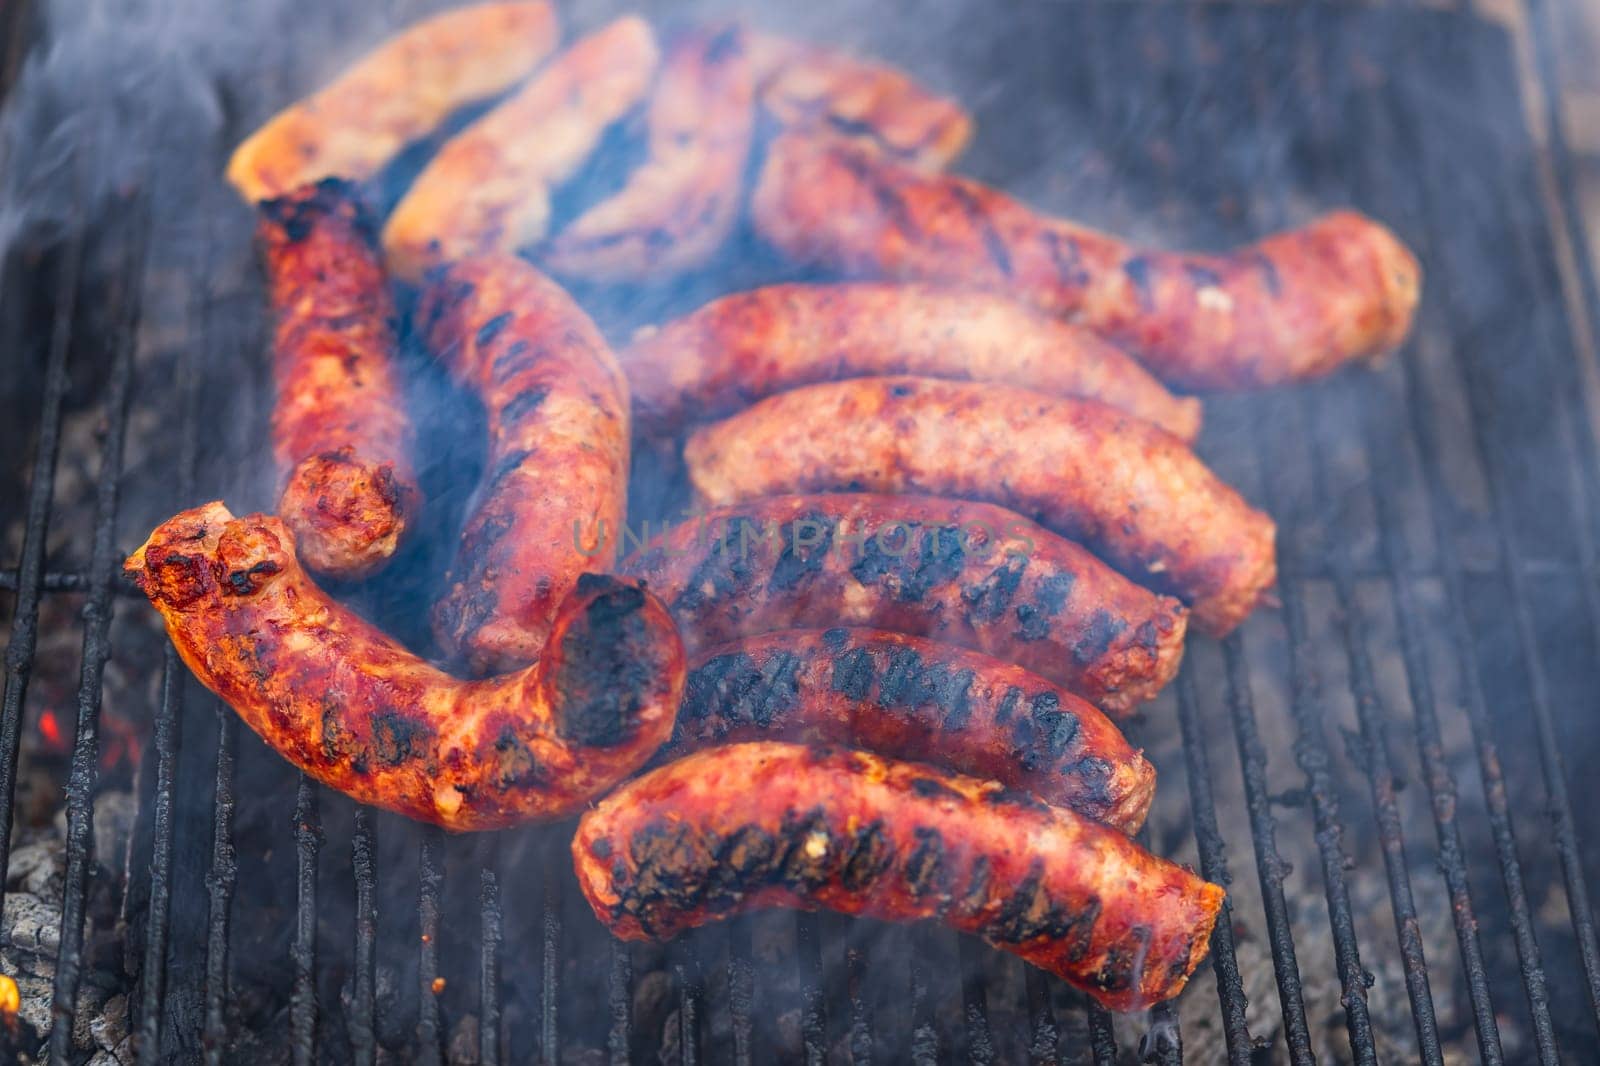 Grilling sausages on barbecue grill. Delicious sausages on charcoal grill